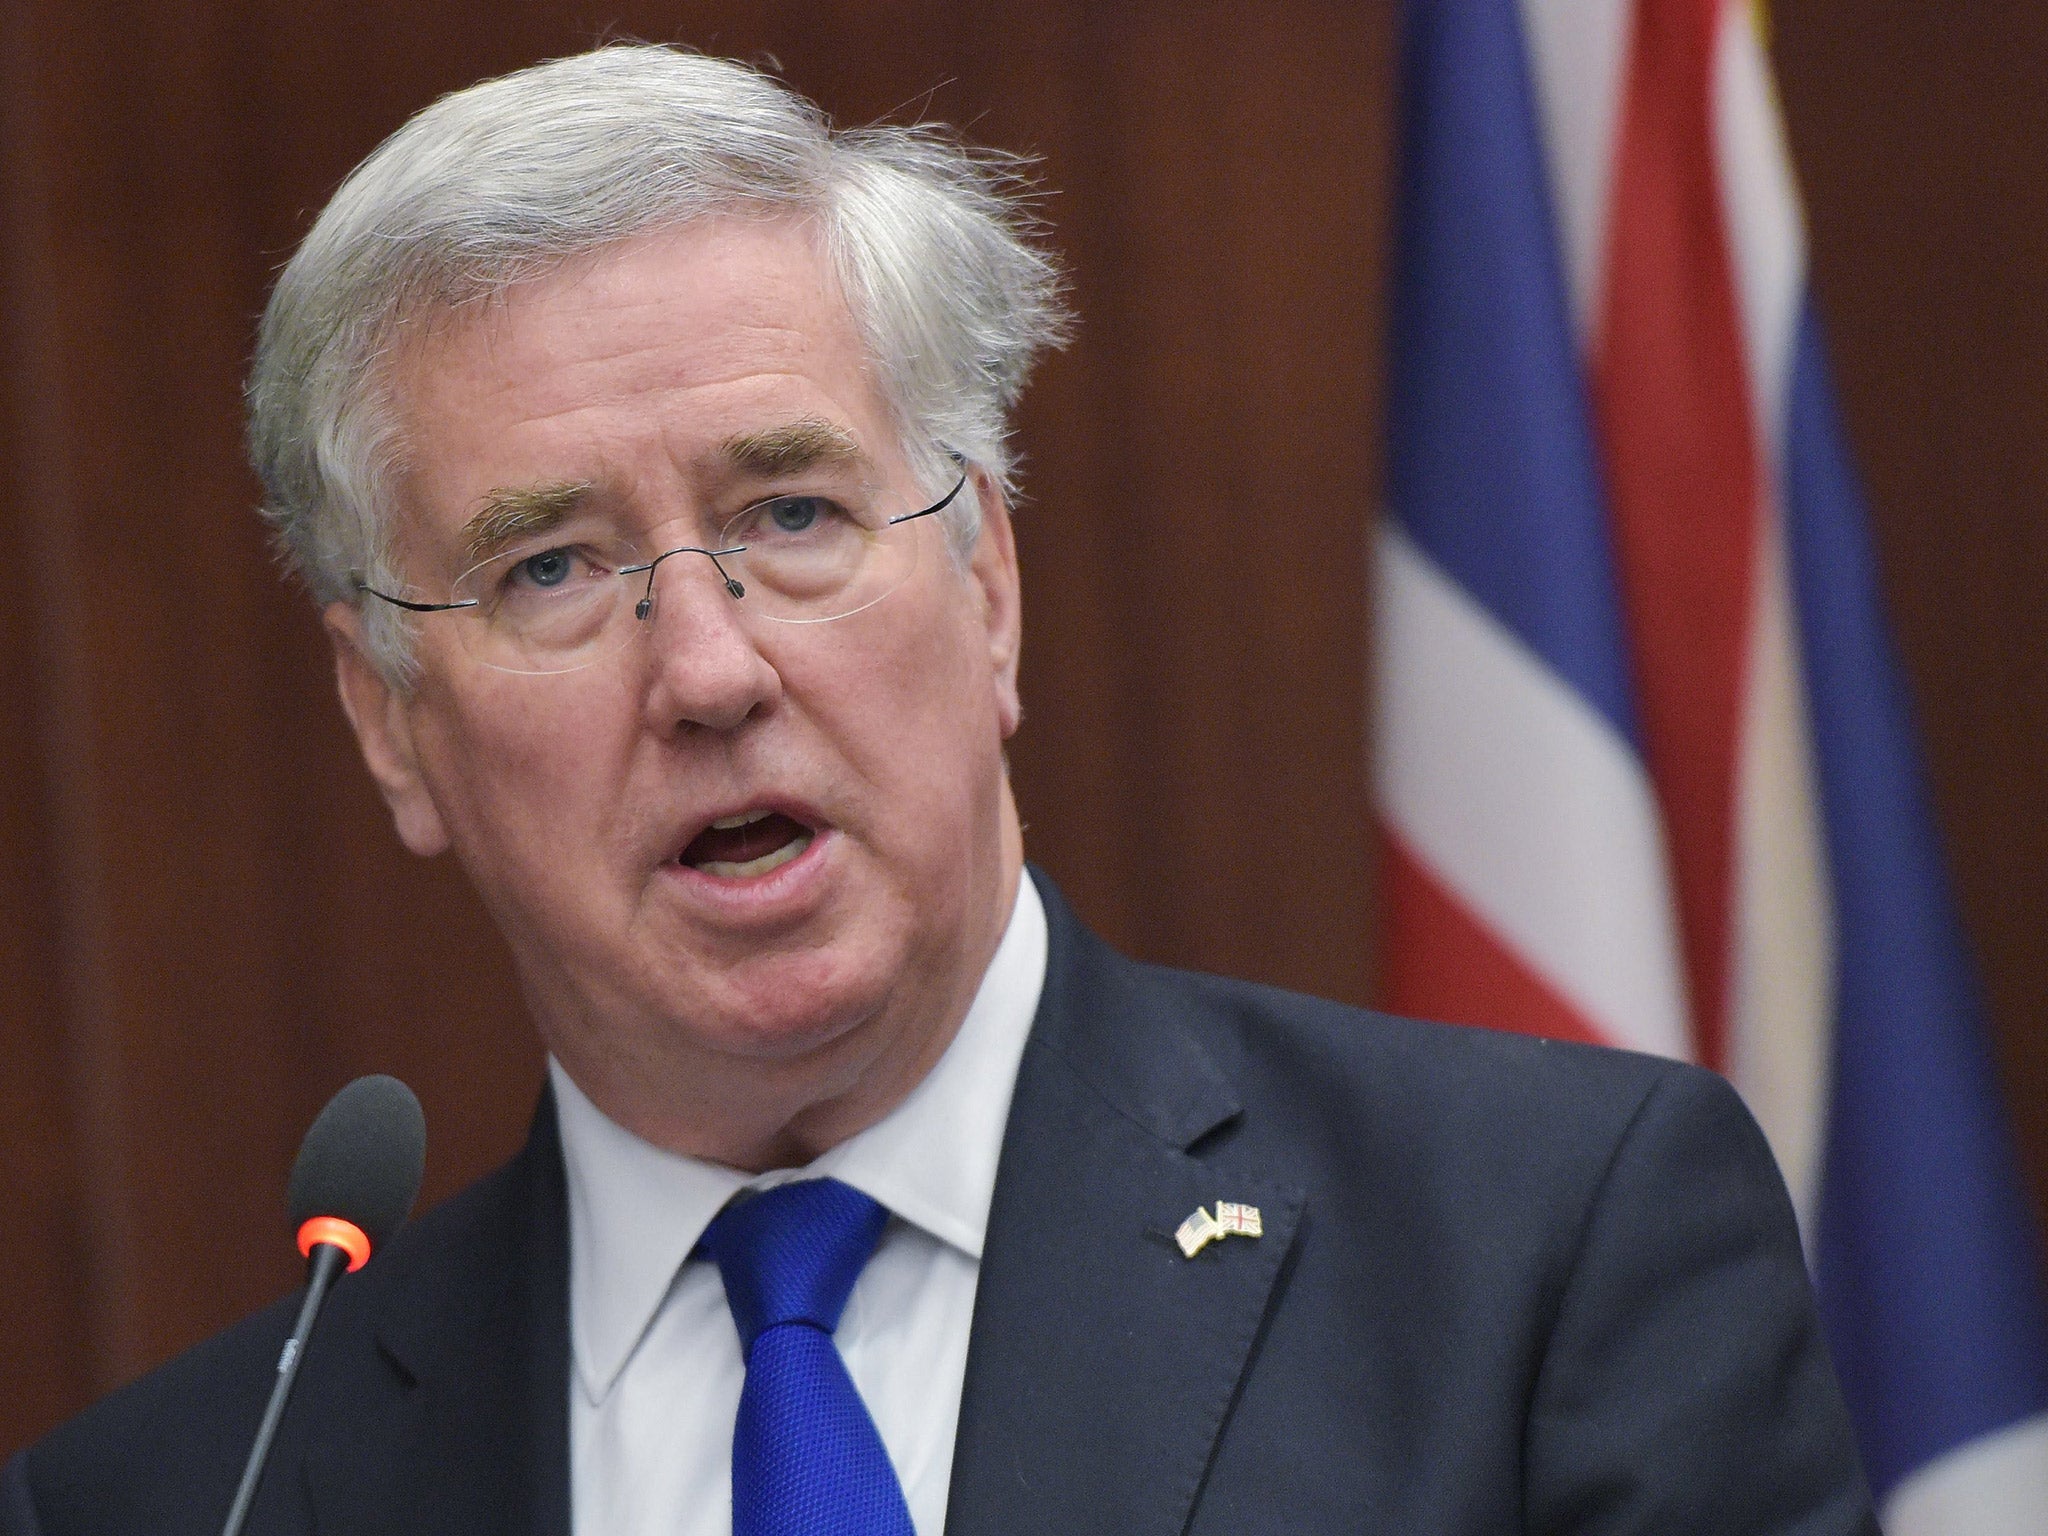 Michael Fallon, the Defence Secretary, attended the dinner (File photo)